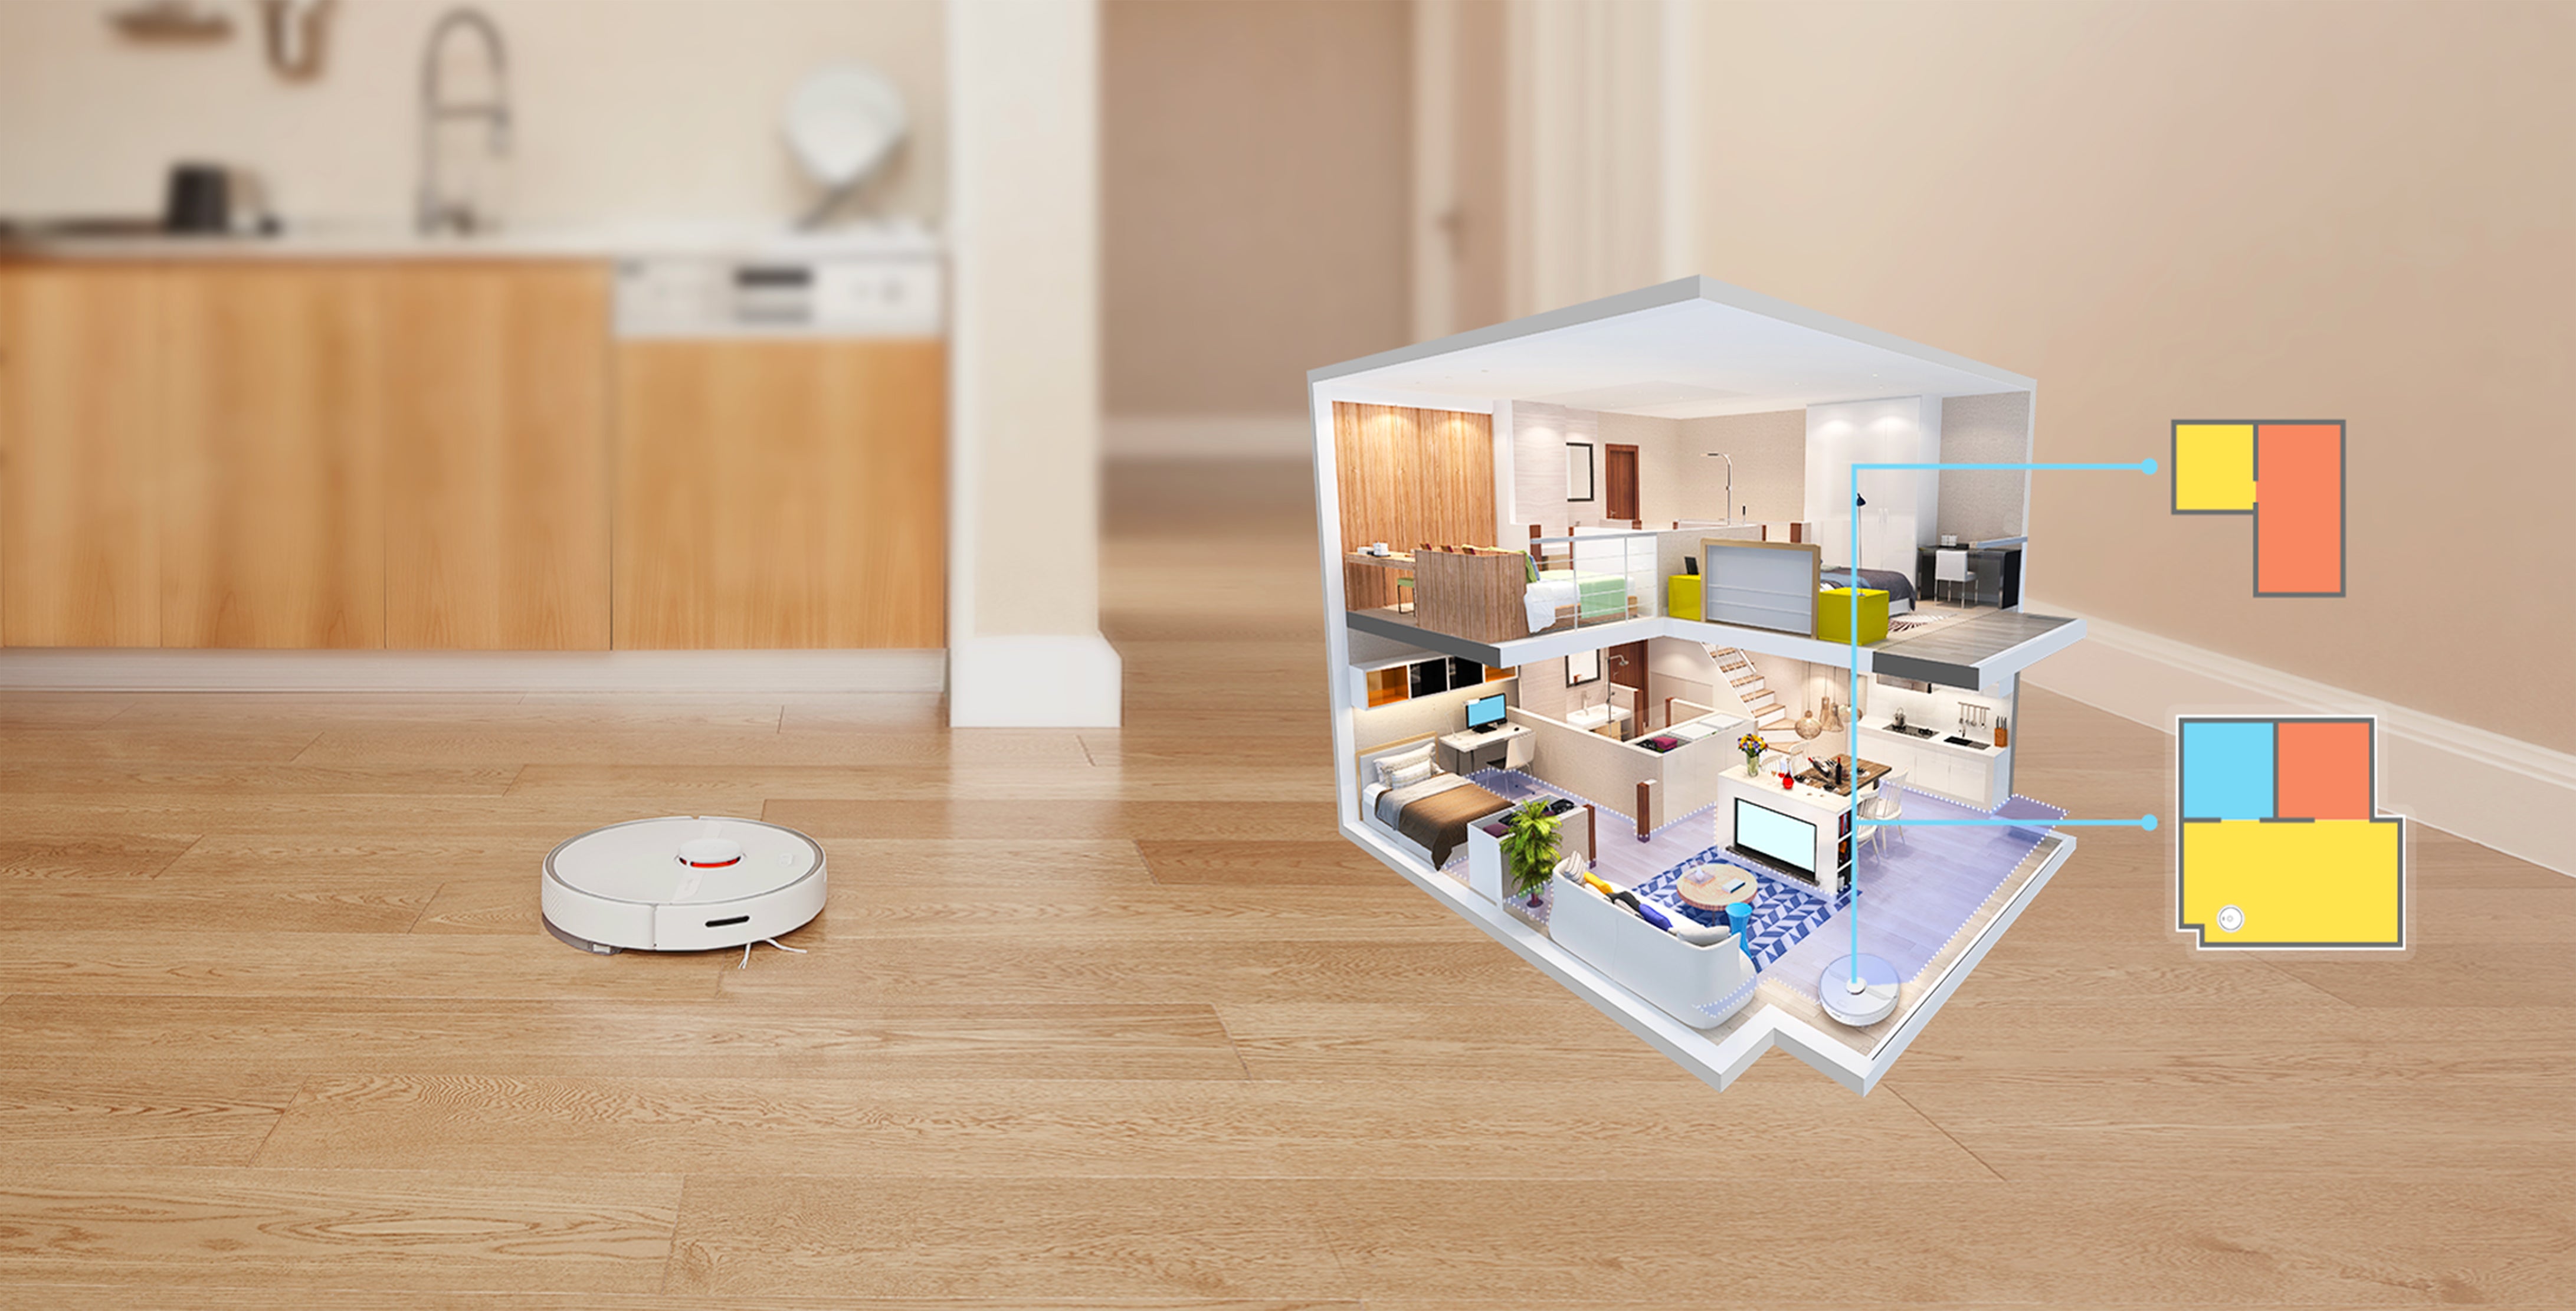 Roborock mapping system recognizes different levels of a home automatically